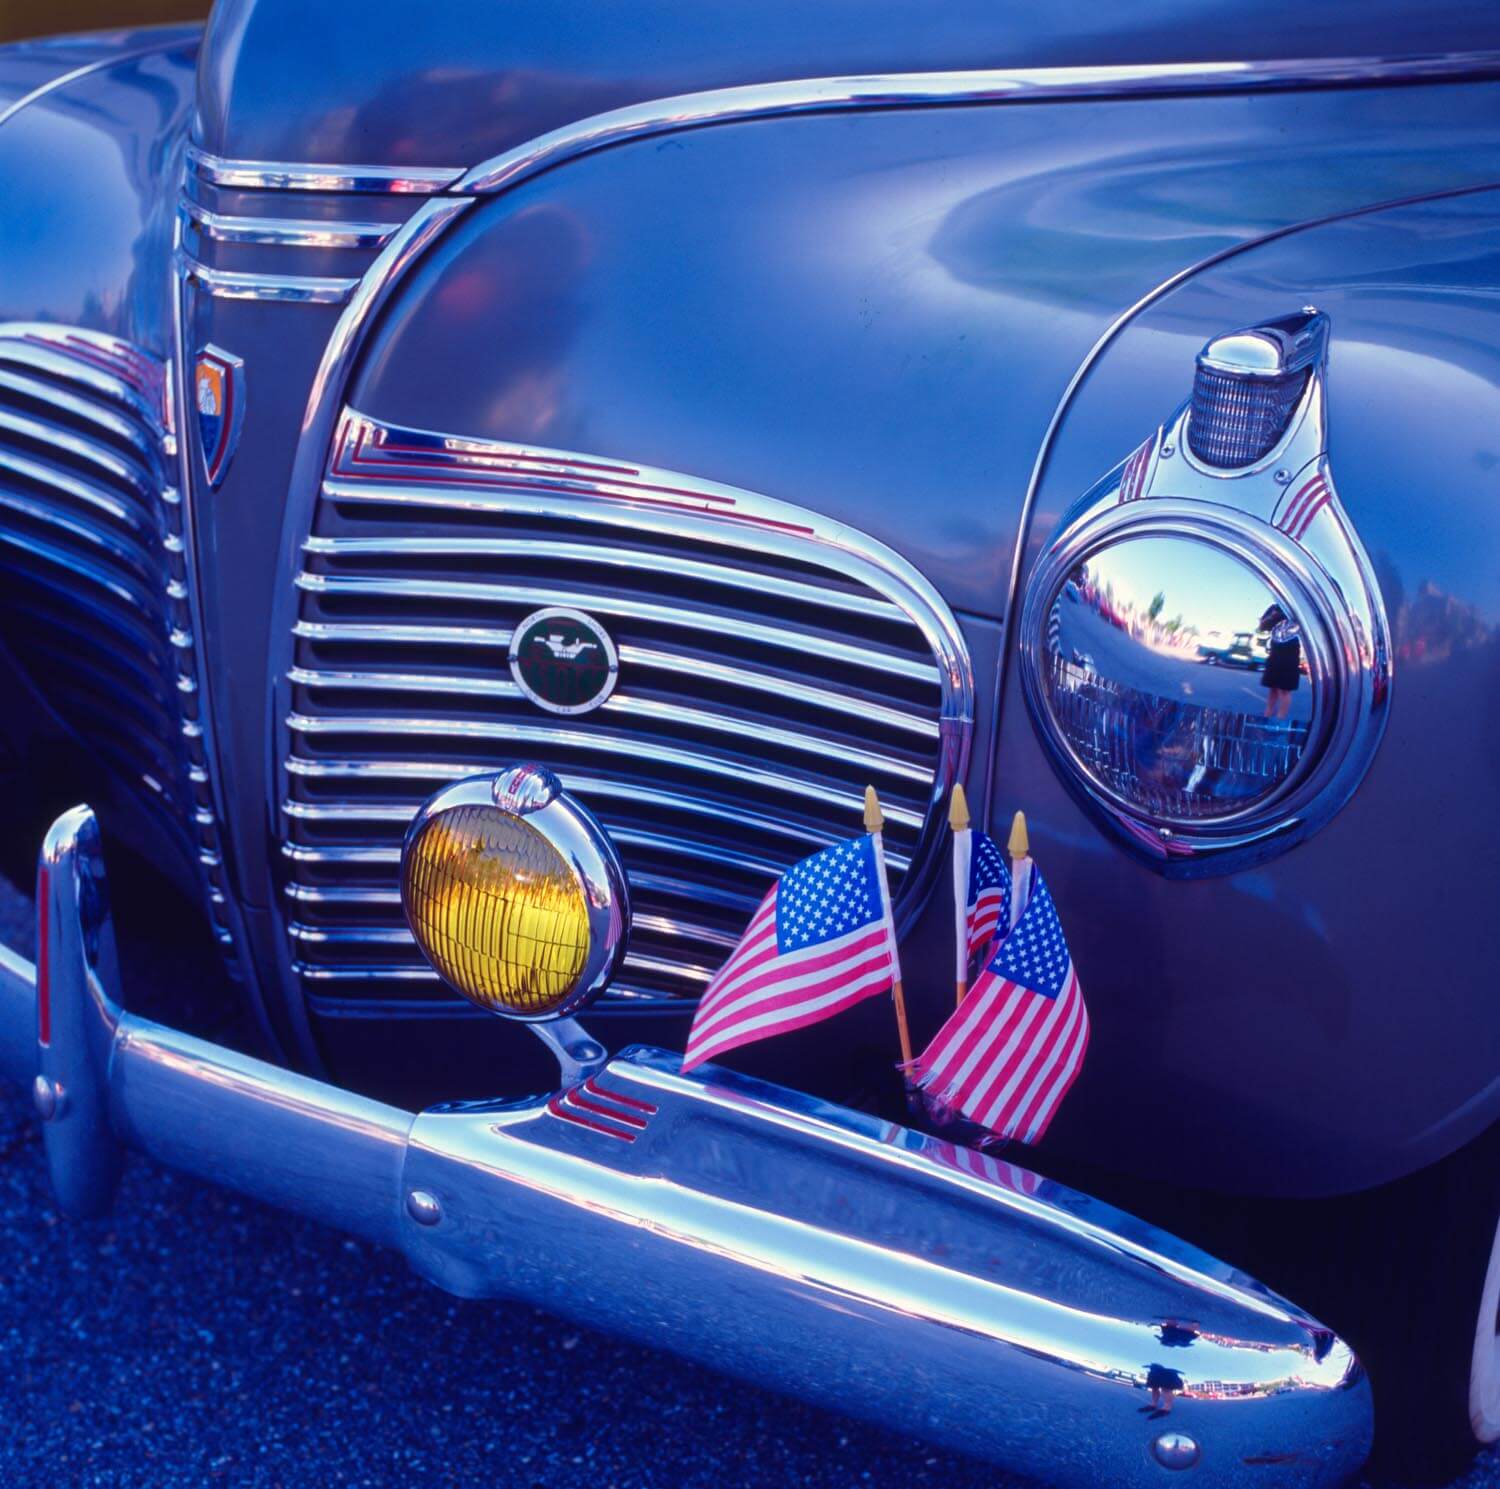 Car show detail - The front of this antique sedan sits nicely in the square frame. Hasselblad 500 CM and Ektachrome film